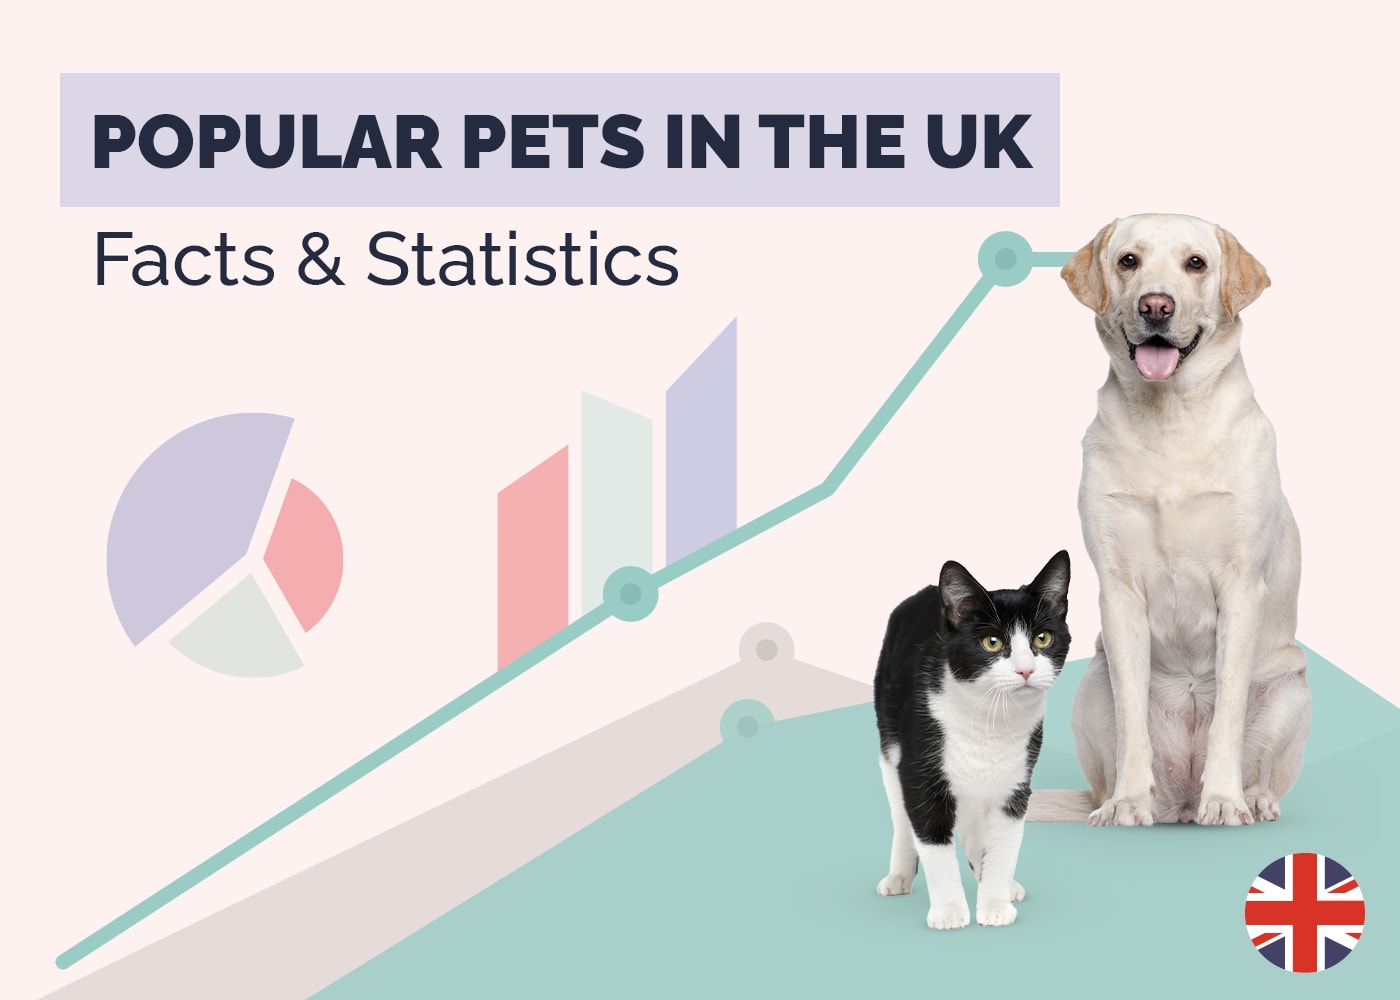 Most Popular Pets in the UK Statistics